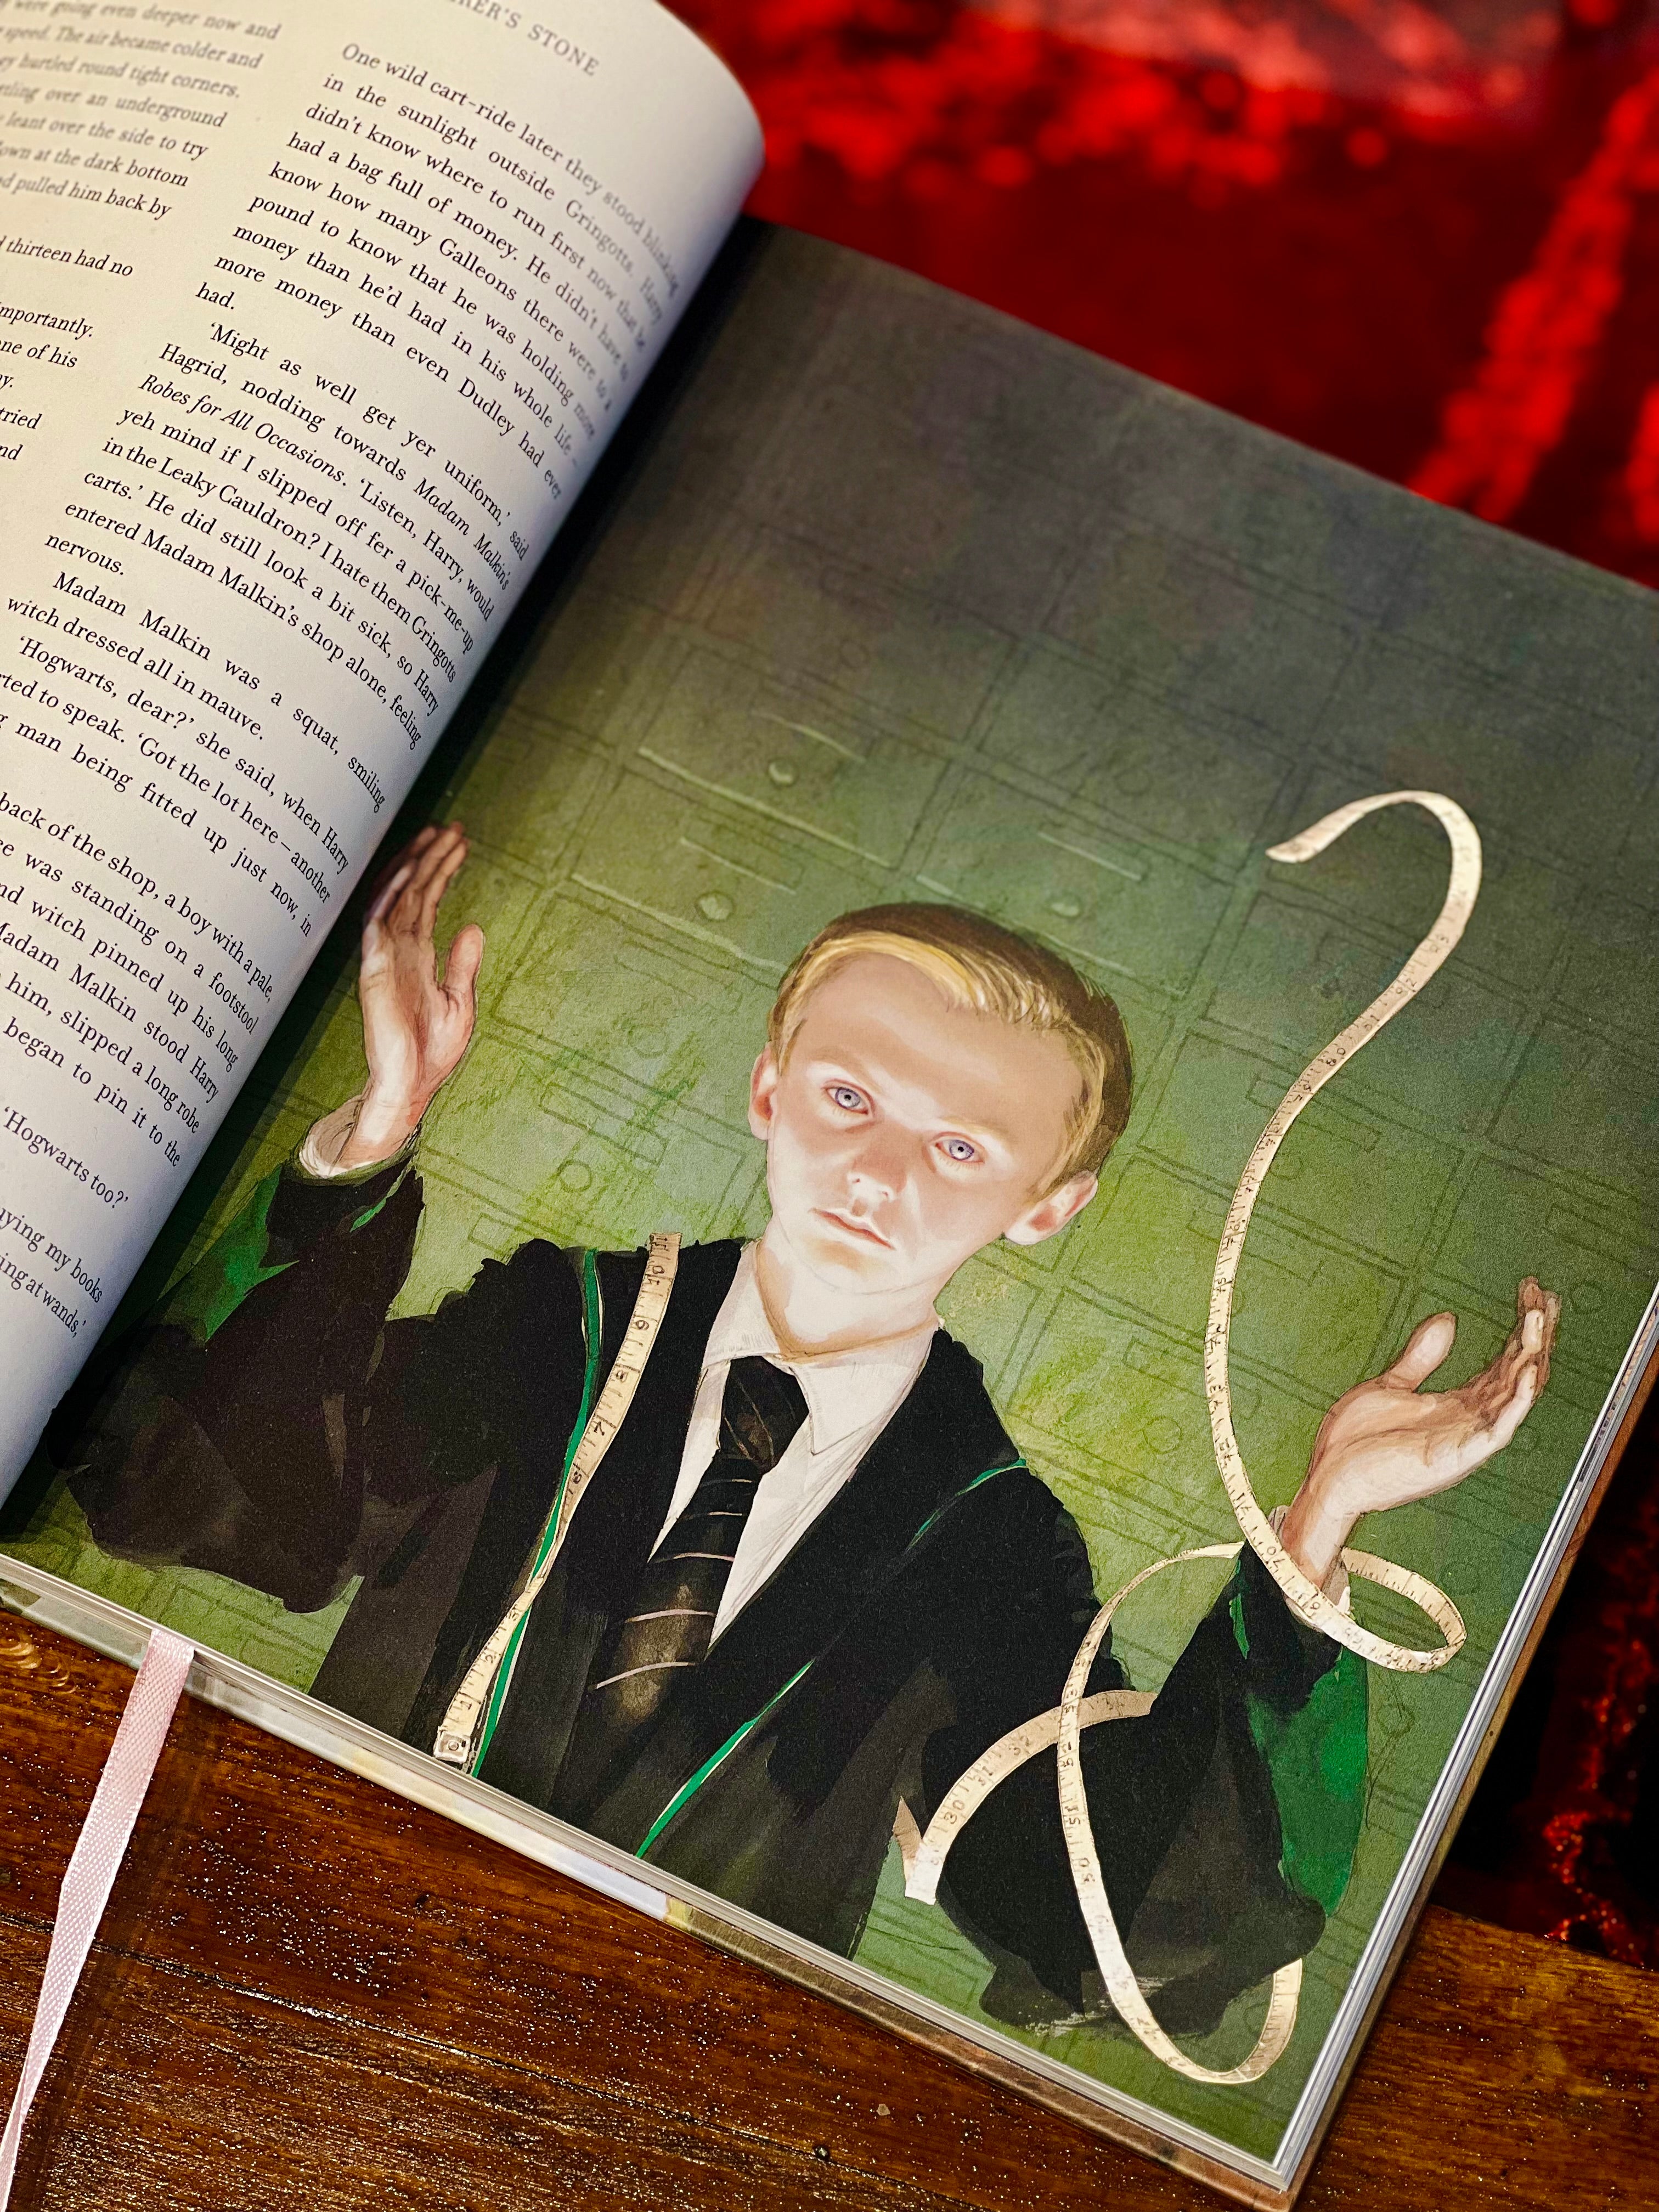 Harry Potter and the Sorcerer's Stone: The Illustrated Edition